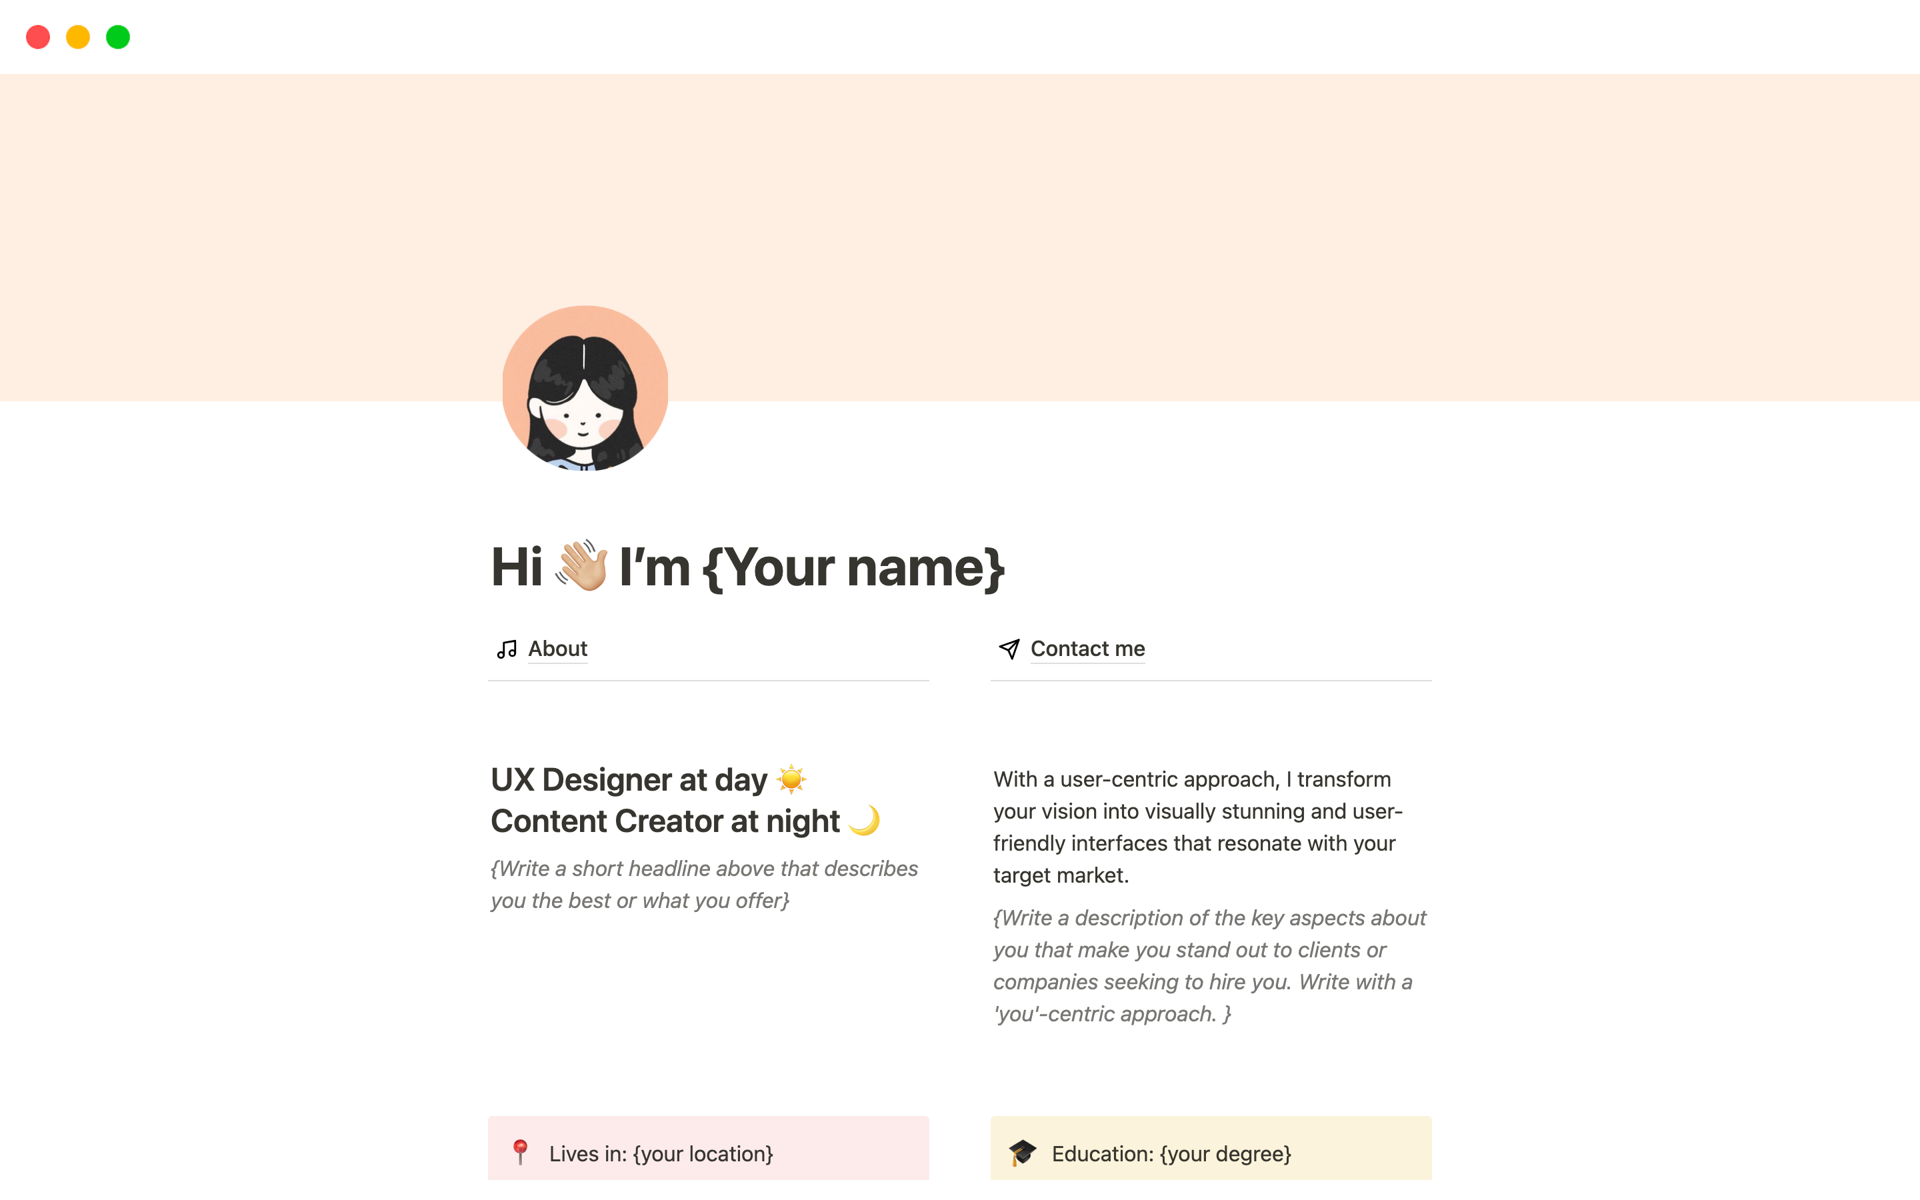 Get design portfolio template to showcase your featured projects and skills. 
✌🏼 The template is full of helpful tips, suggestions and example content